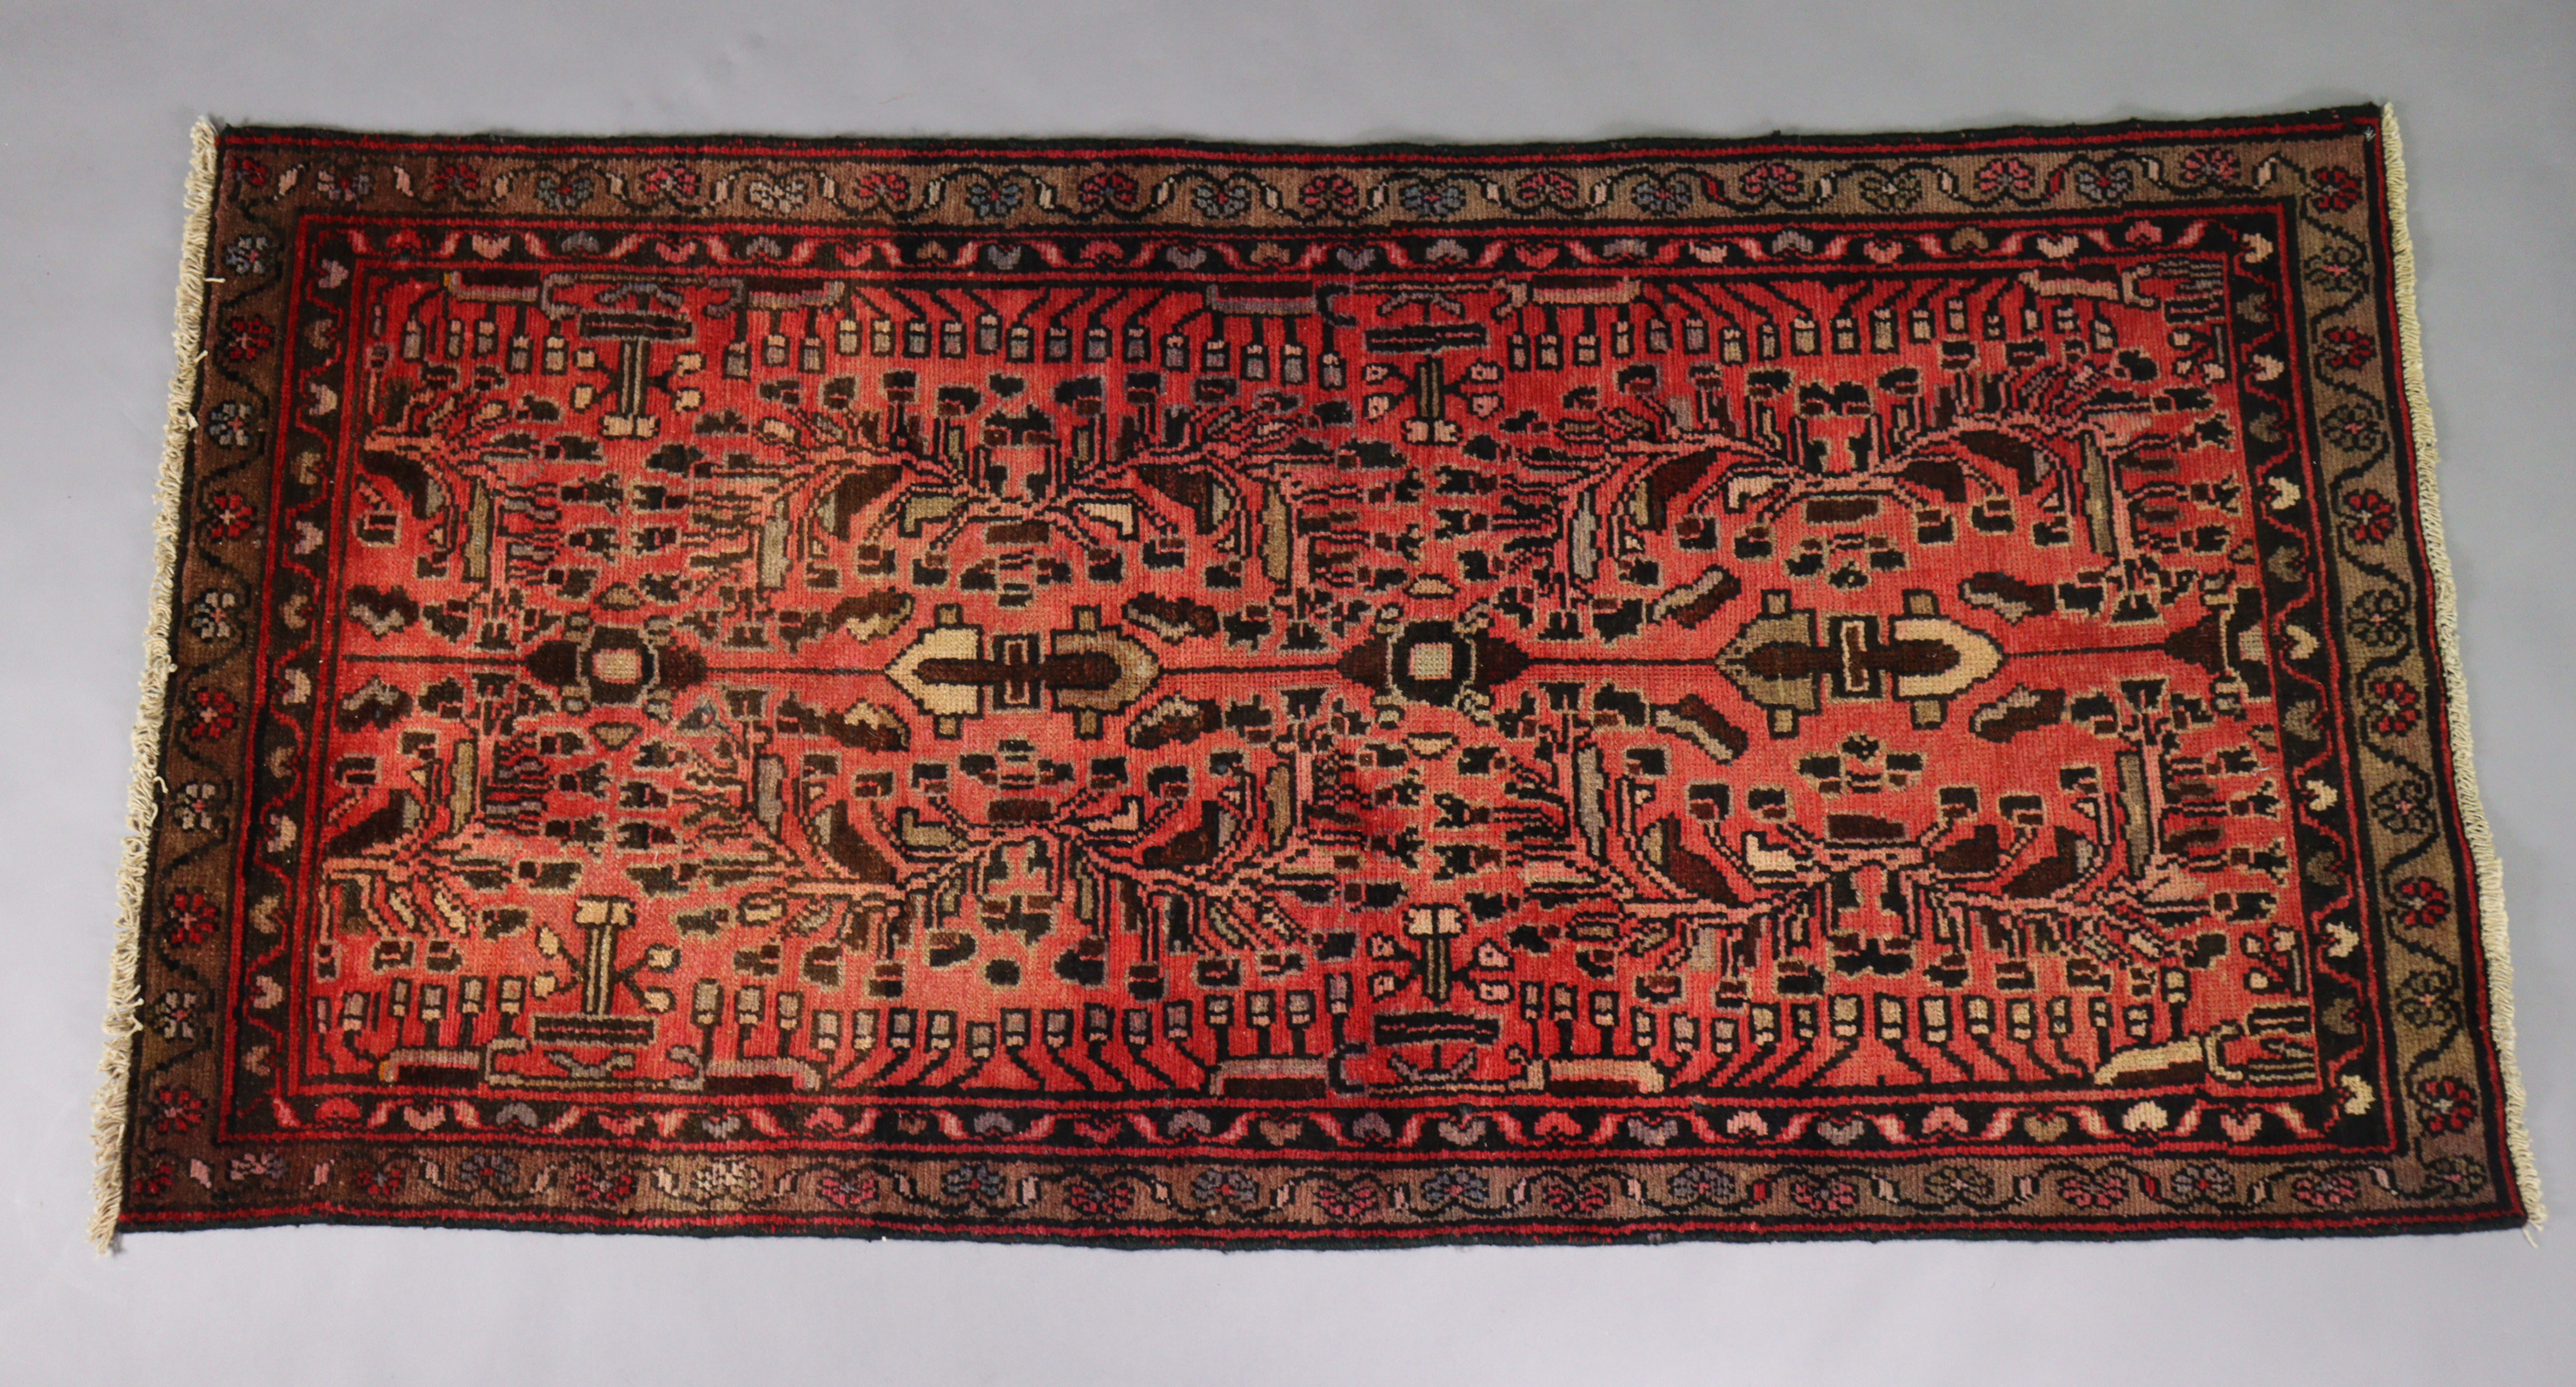 A Persian Zanjan rug of madder ground with repeating geometric designs surrounded by a wide